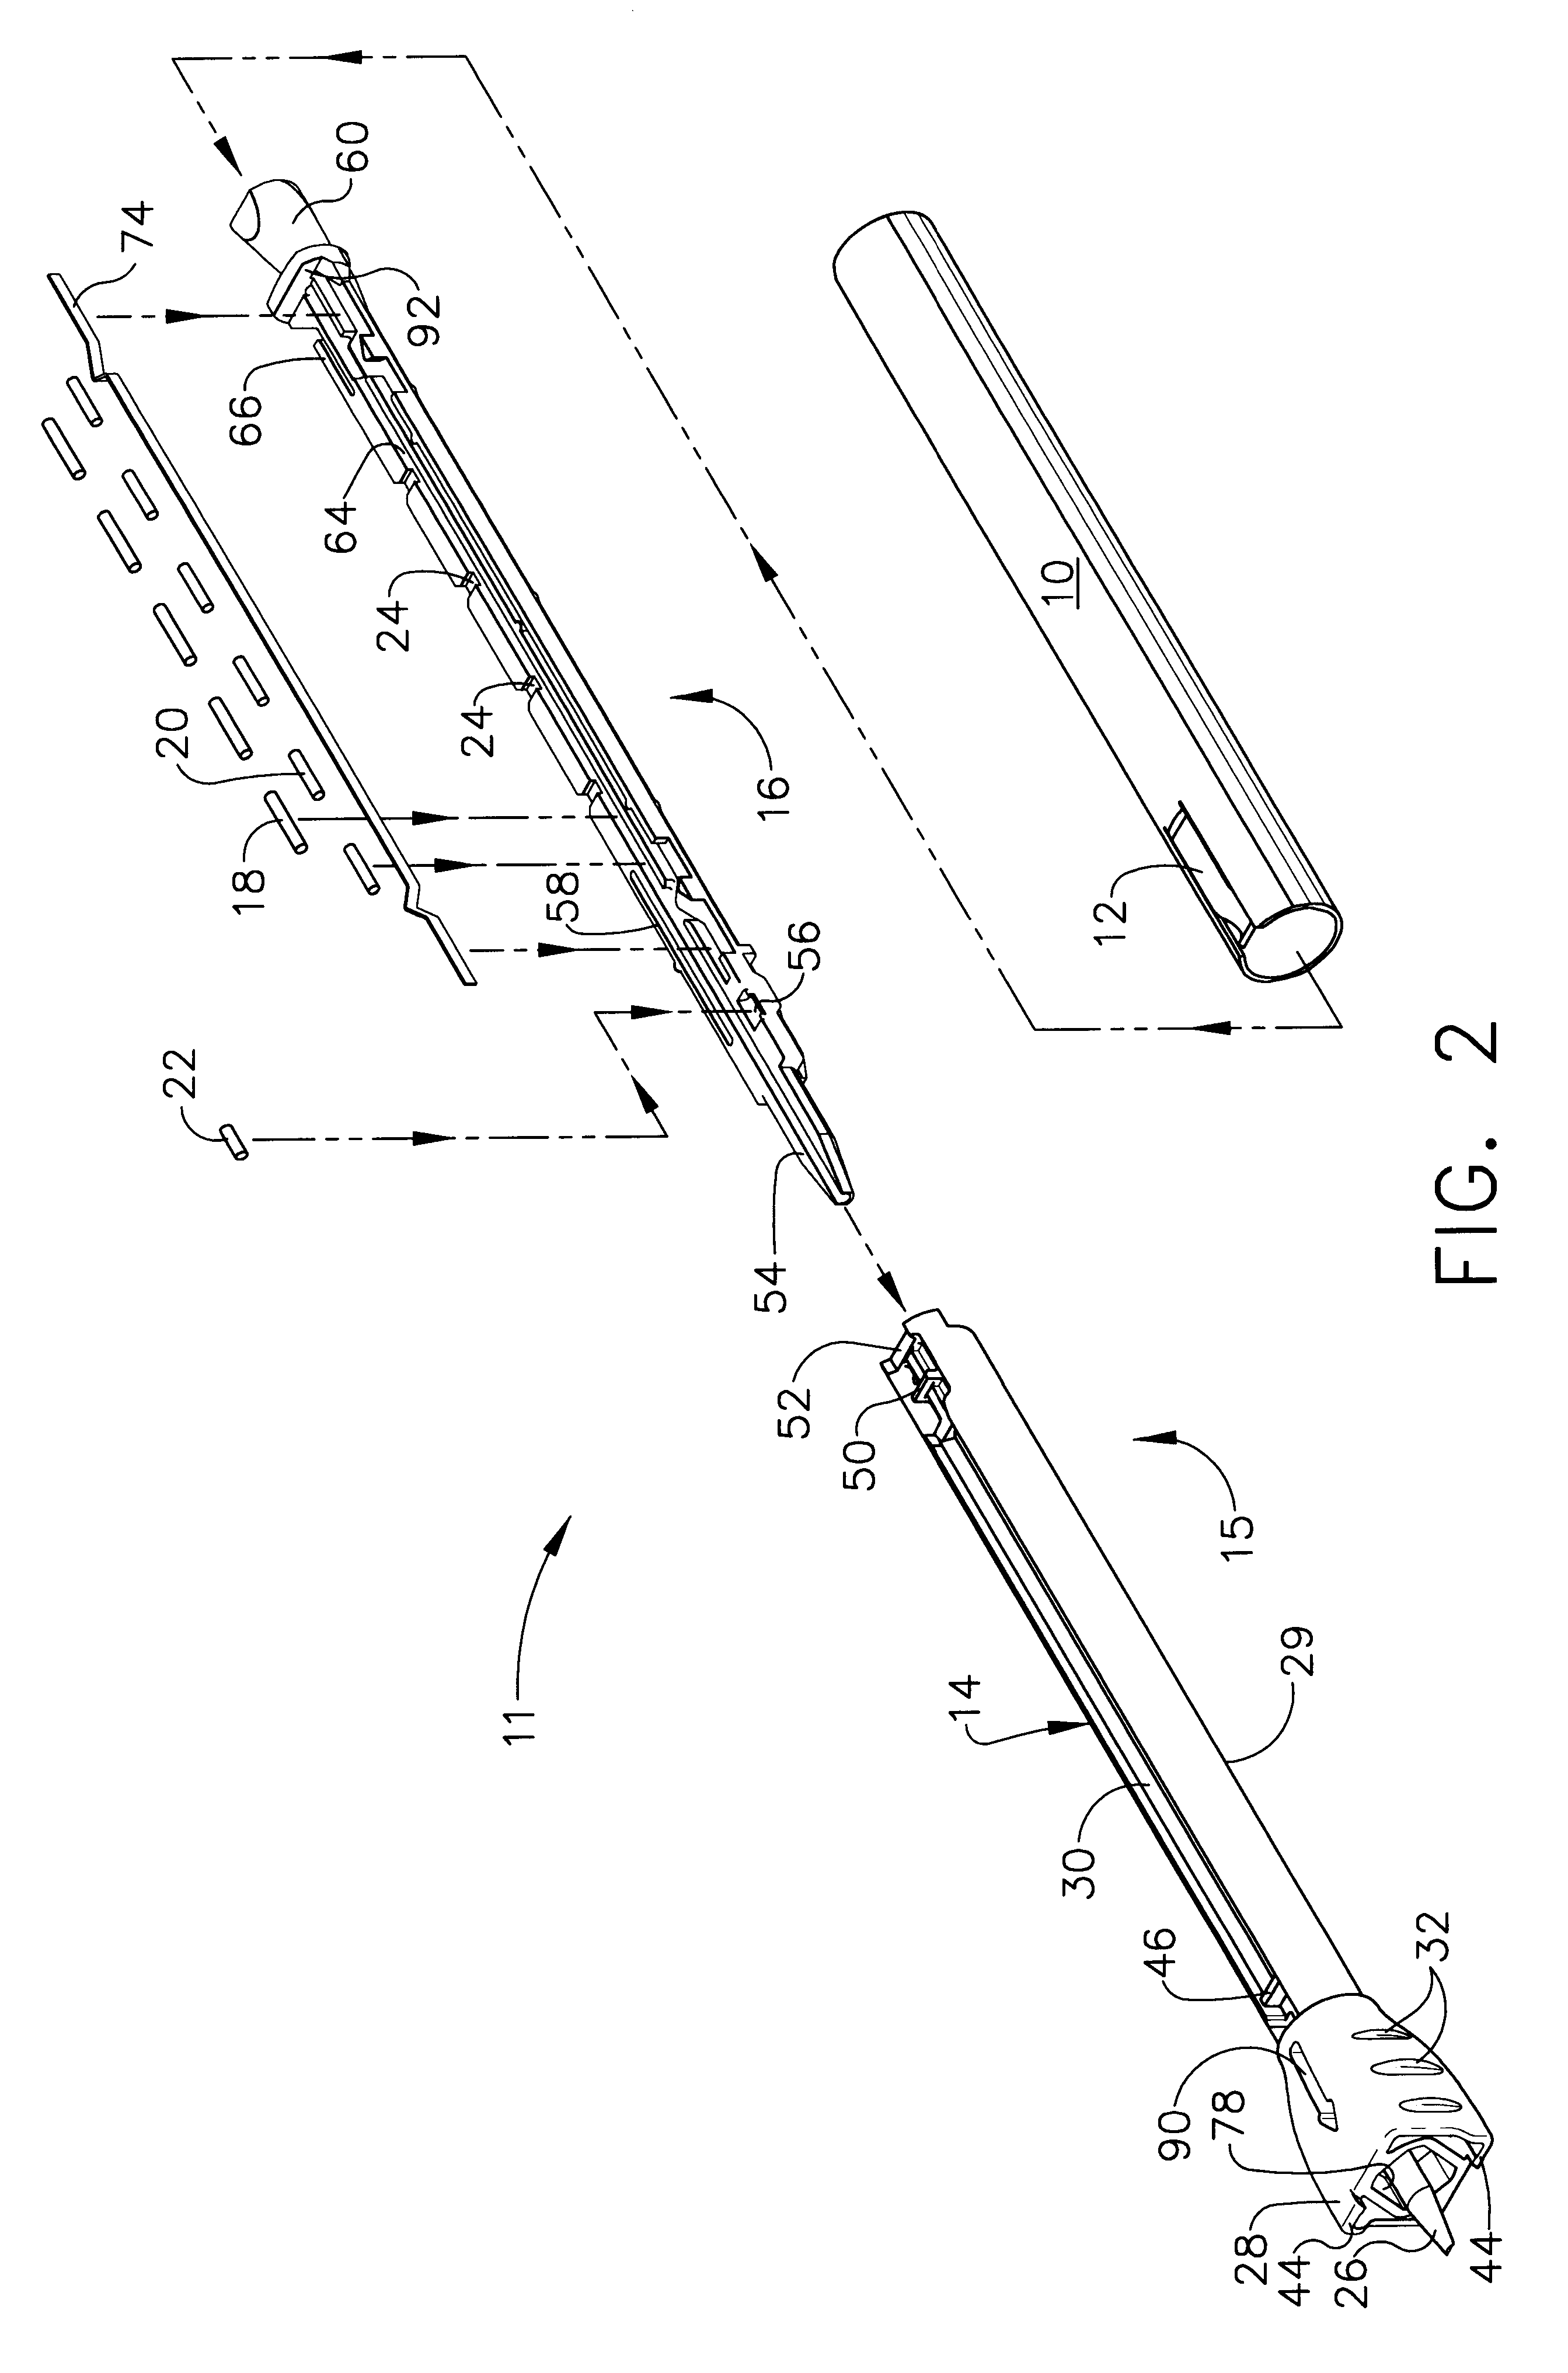 Brachytherapy cartridge including absorbable and autoclaveable spacer